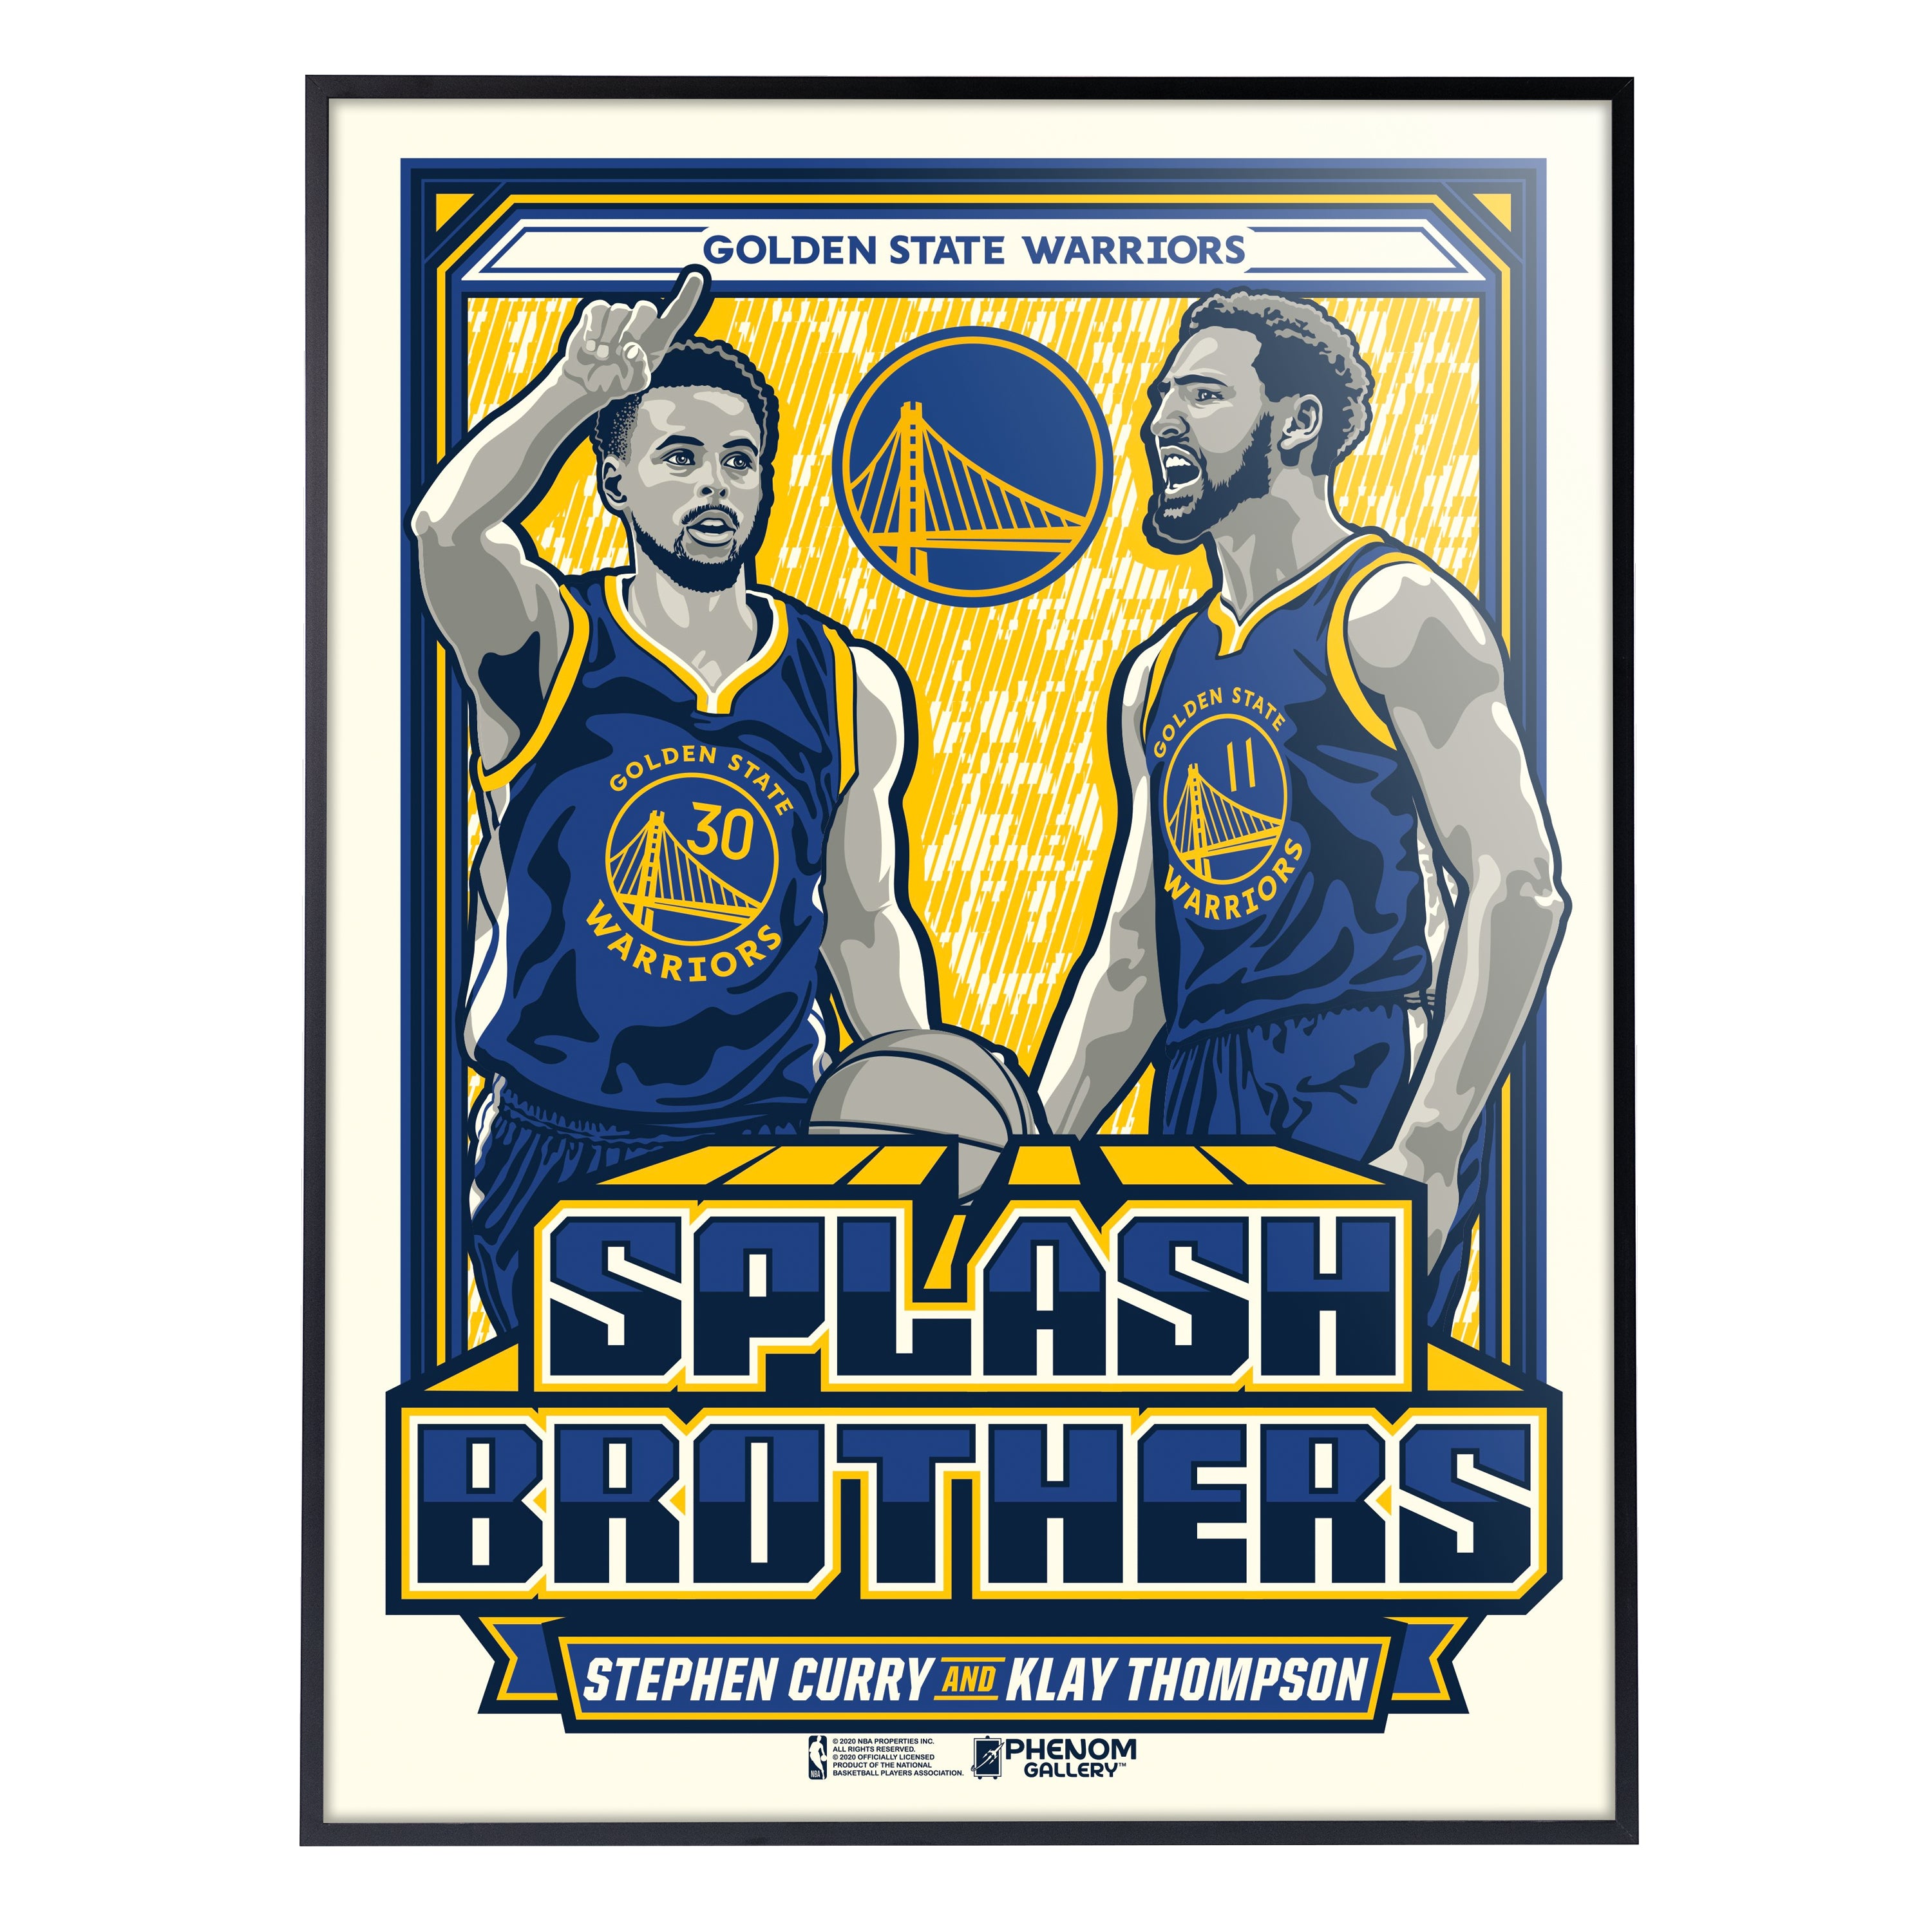 New splash Brothers T-shirt Available in Sizes 